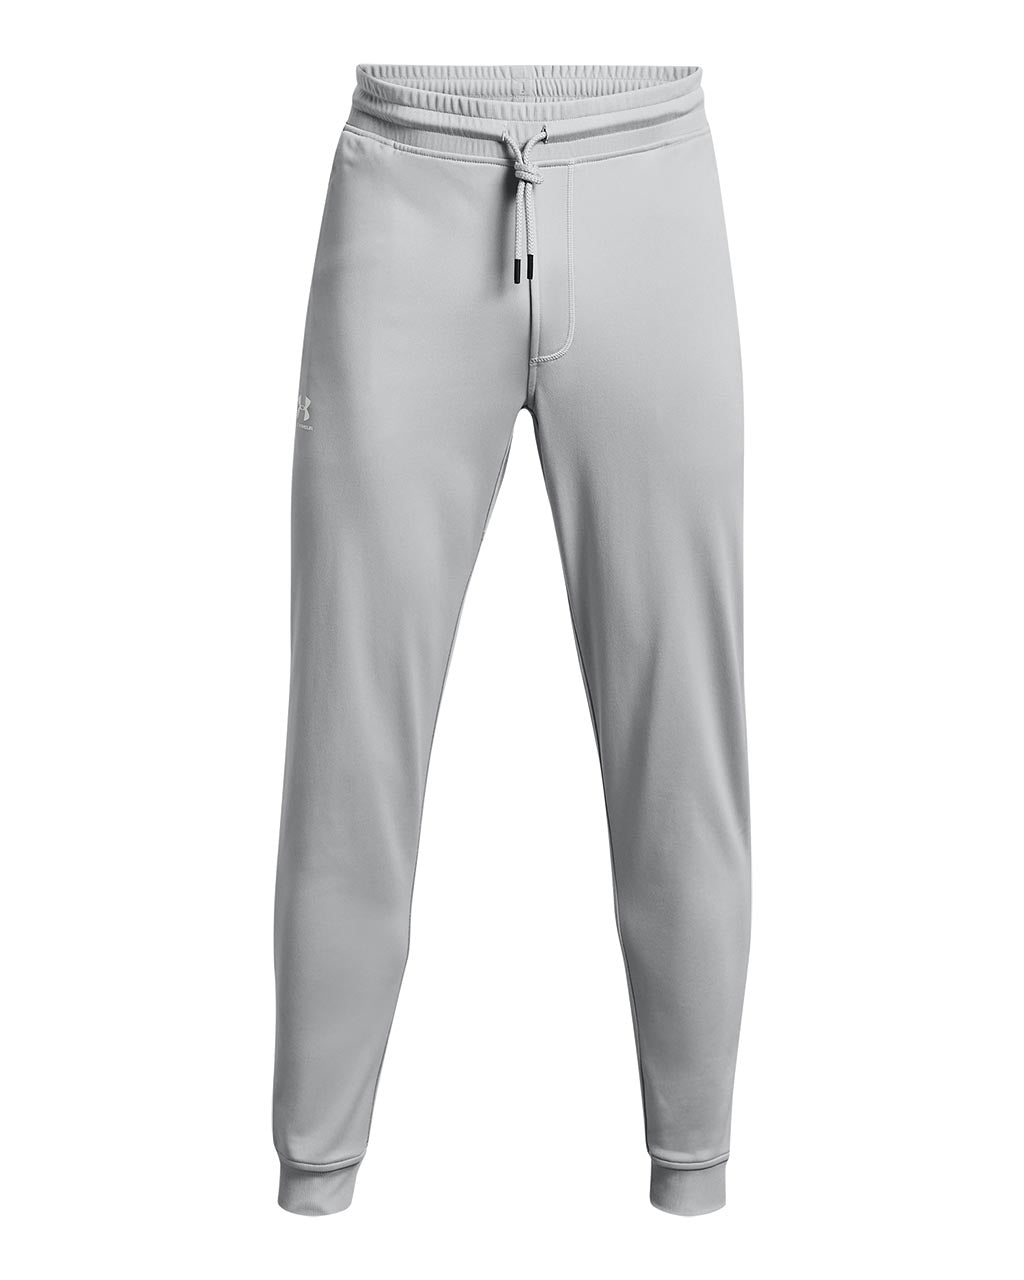 Under Armour Mens Sportstyle Joggers